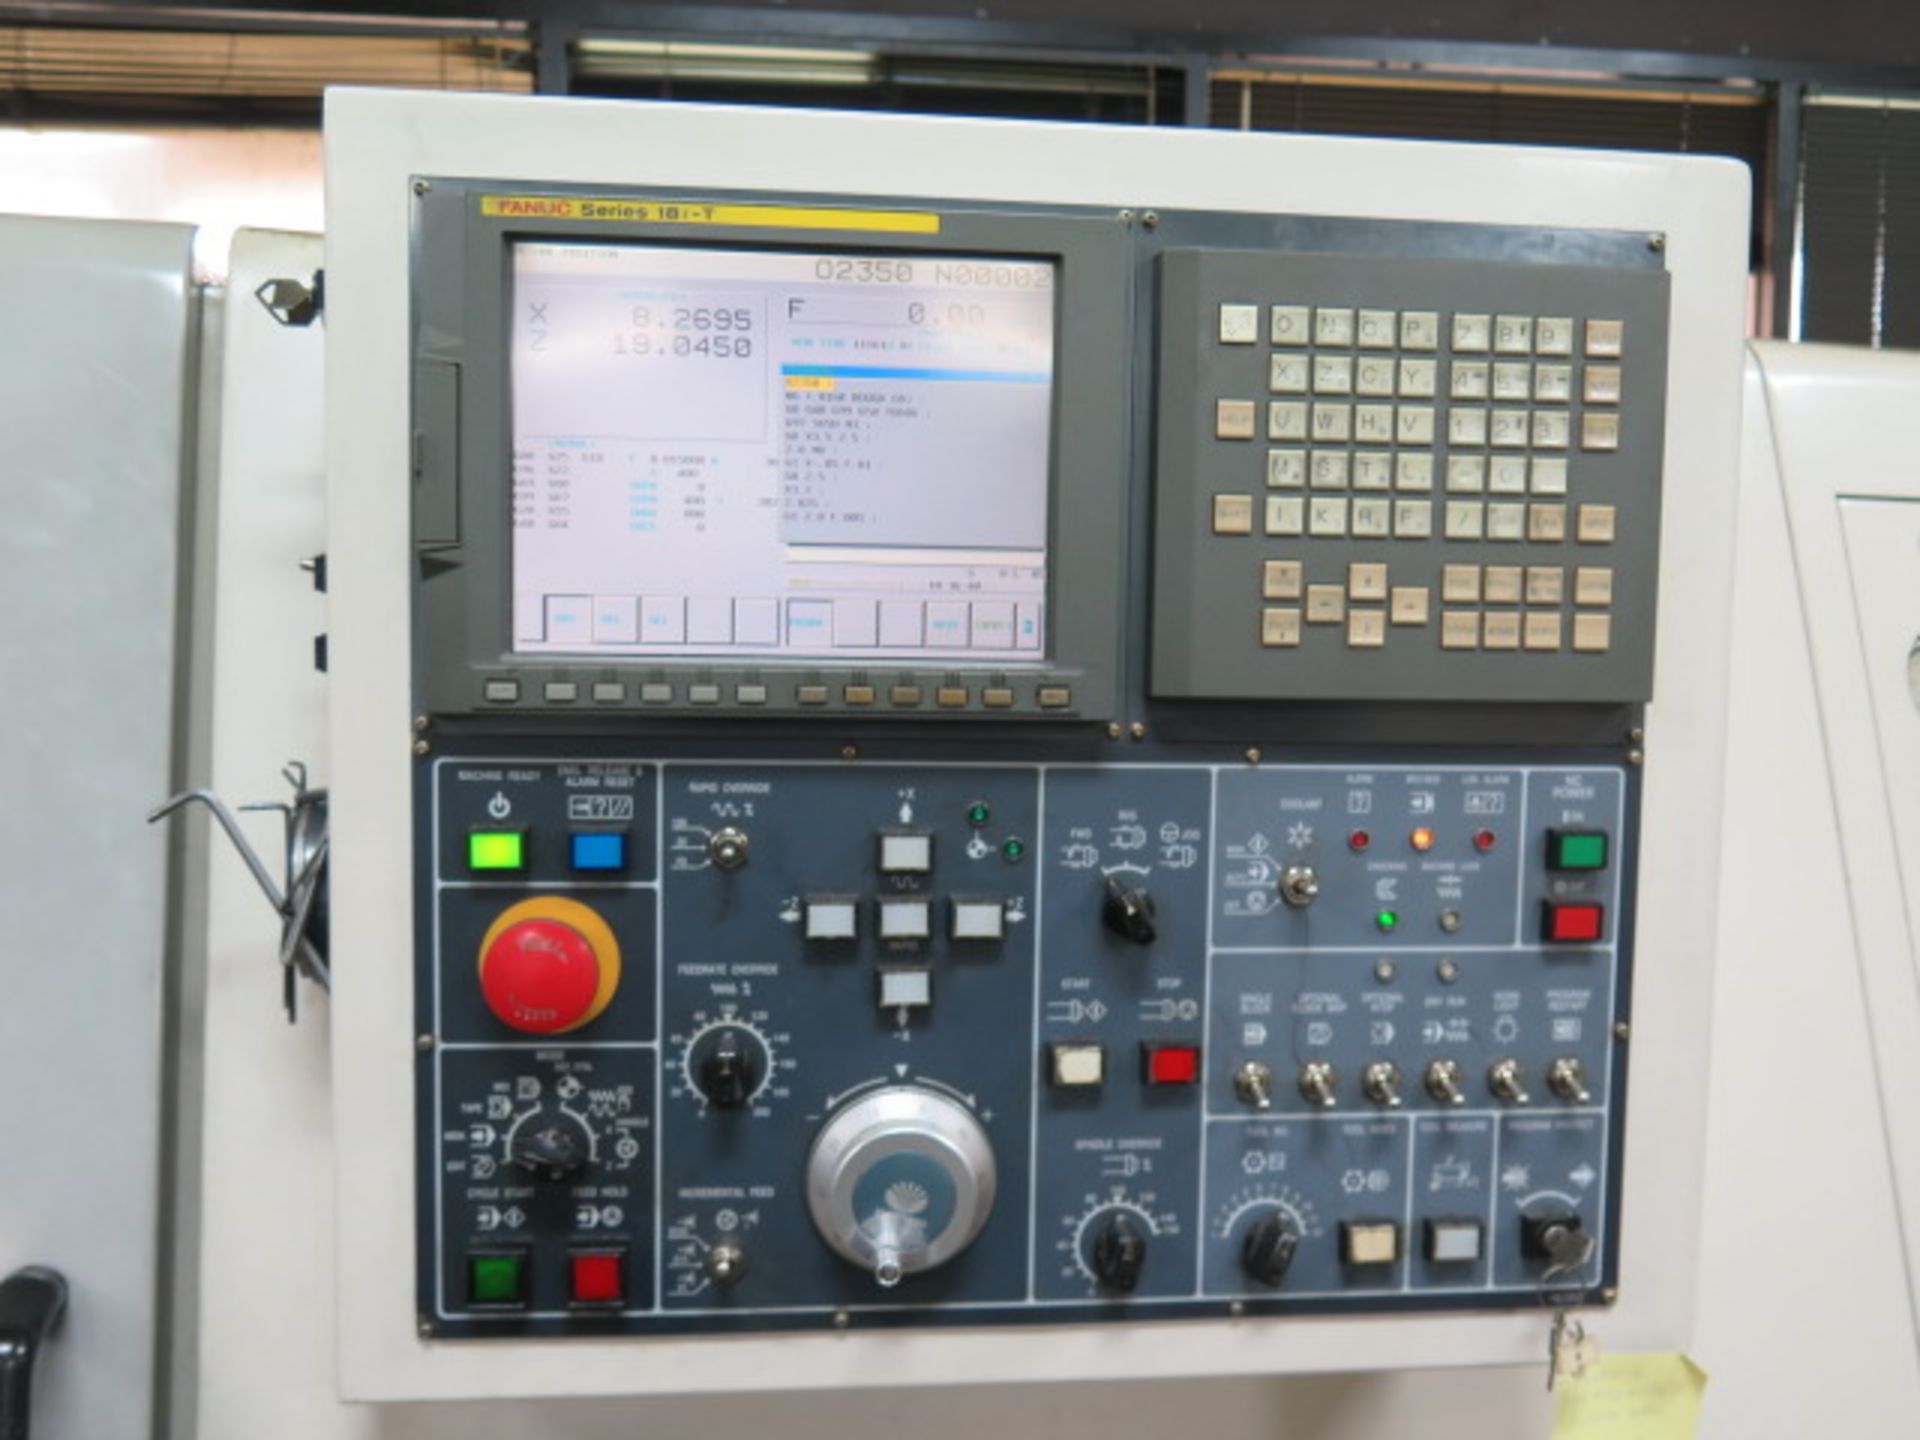 2000 Daewoo PUMA 300B CNC Turning Center s/n PN250827 w/ Fanuc Series 18i-T Controls, SOLD AS IS - Image 12 of 15